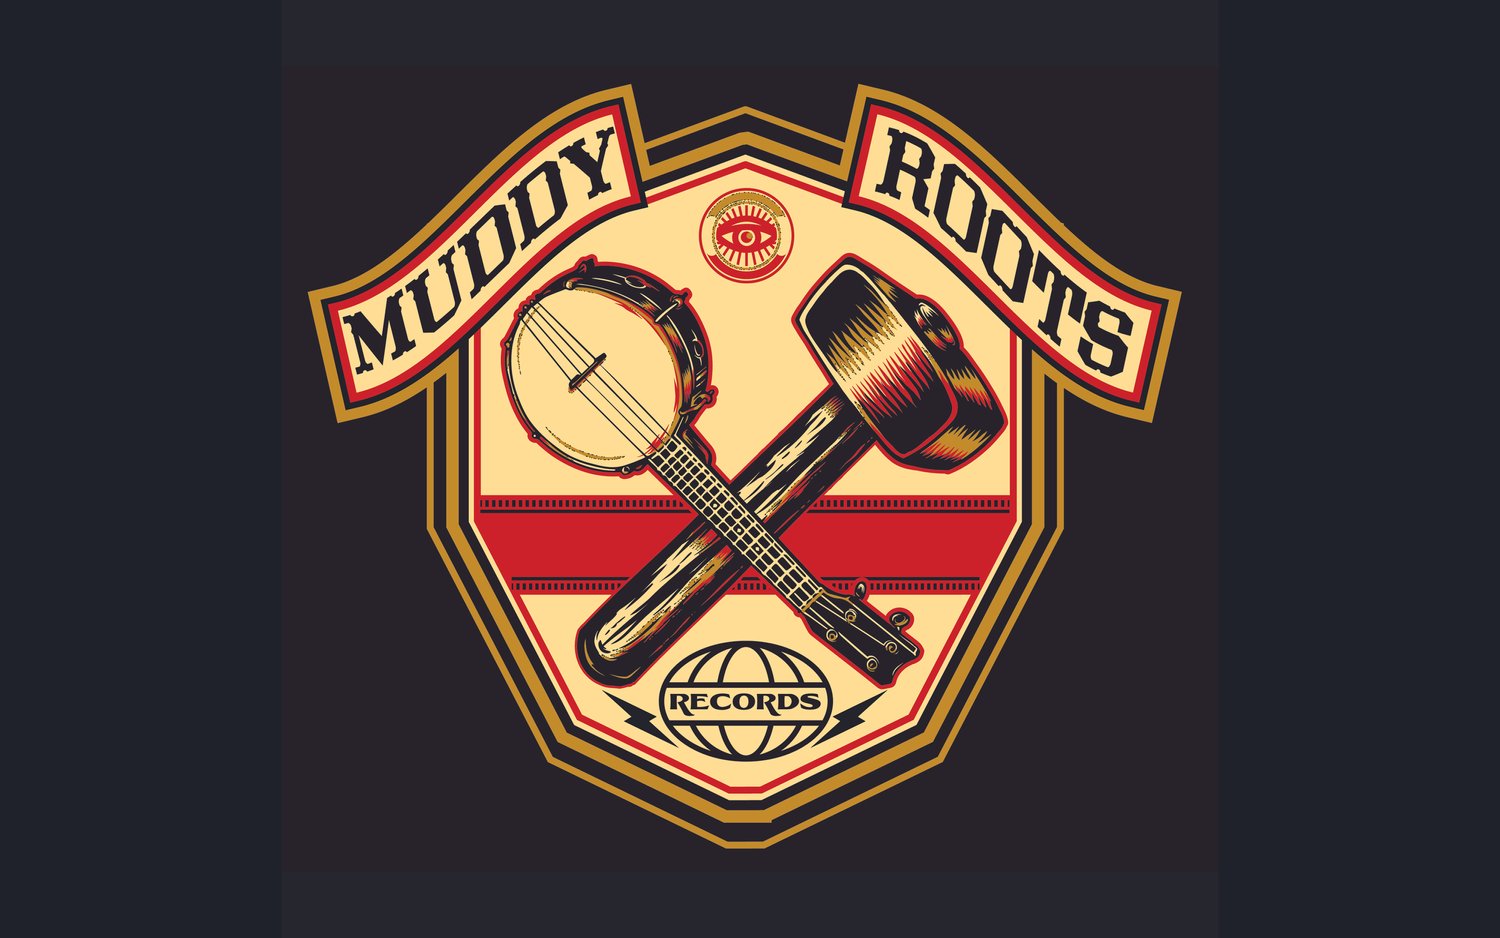 Muddy Roots Records